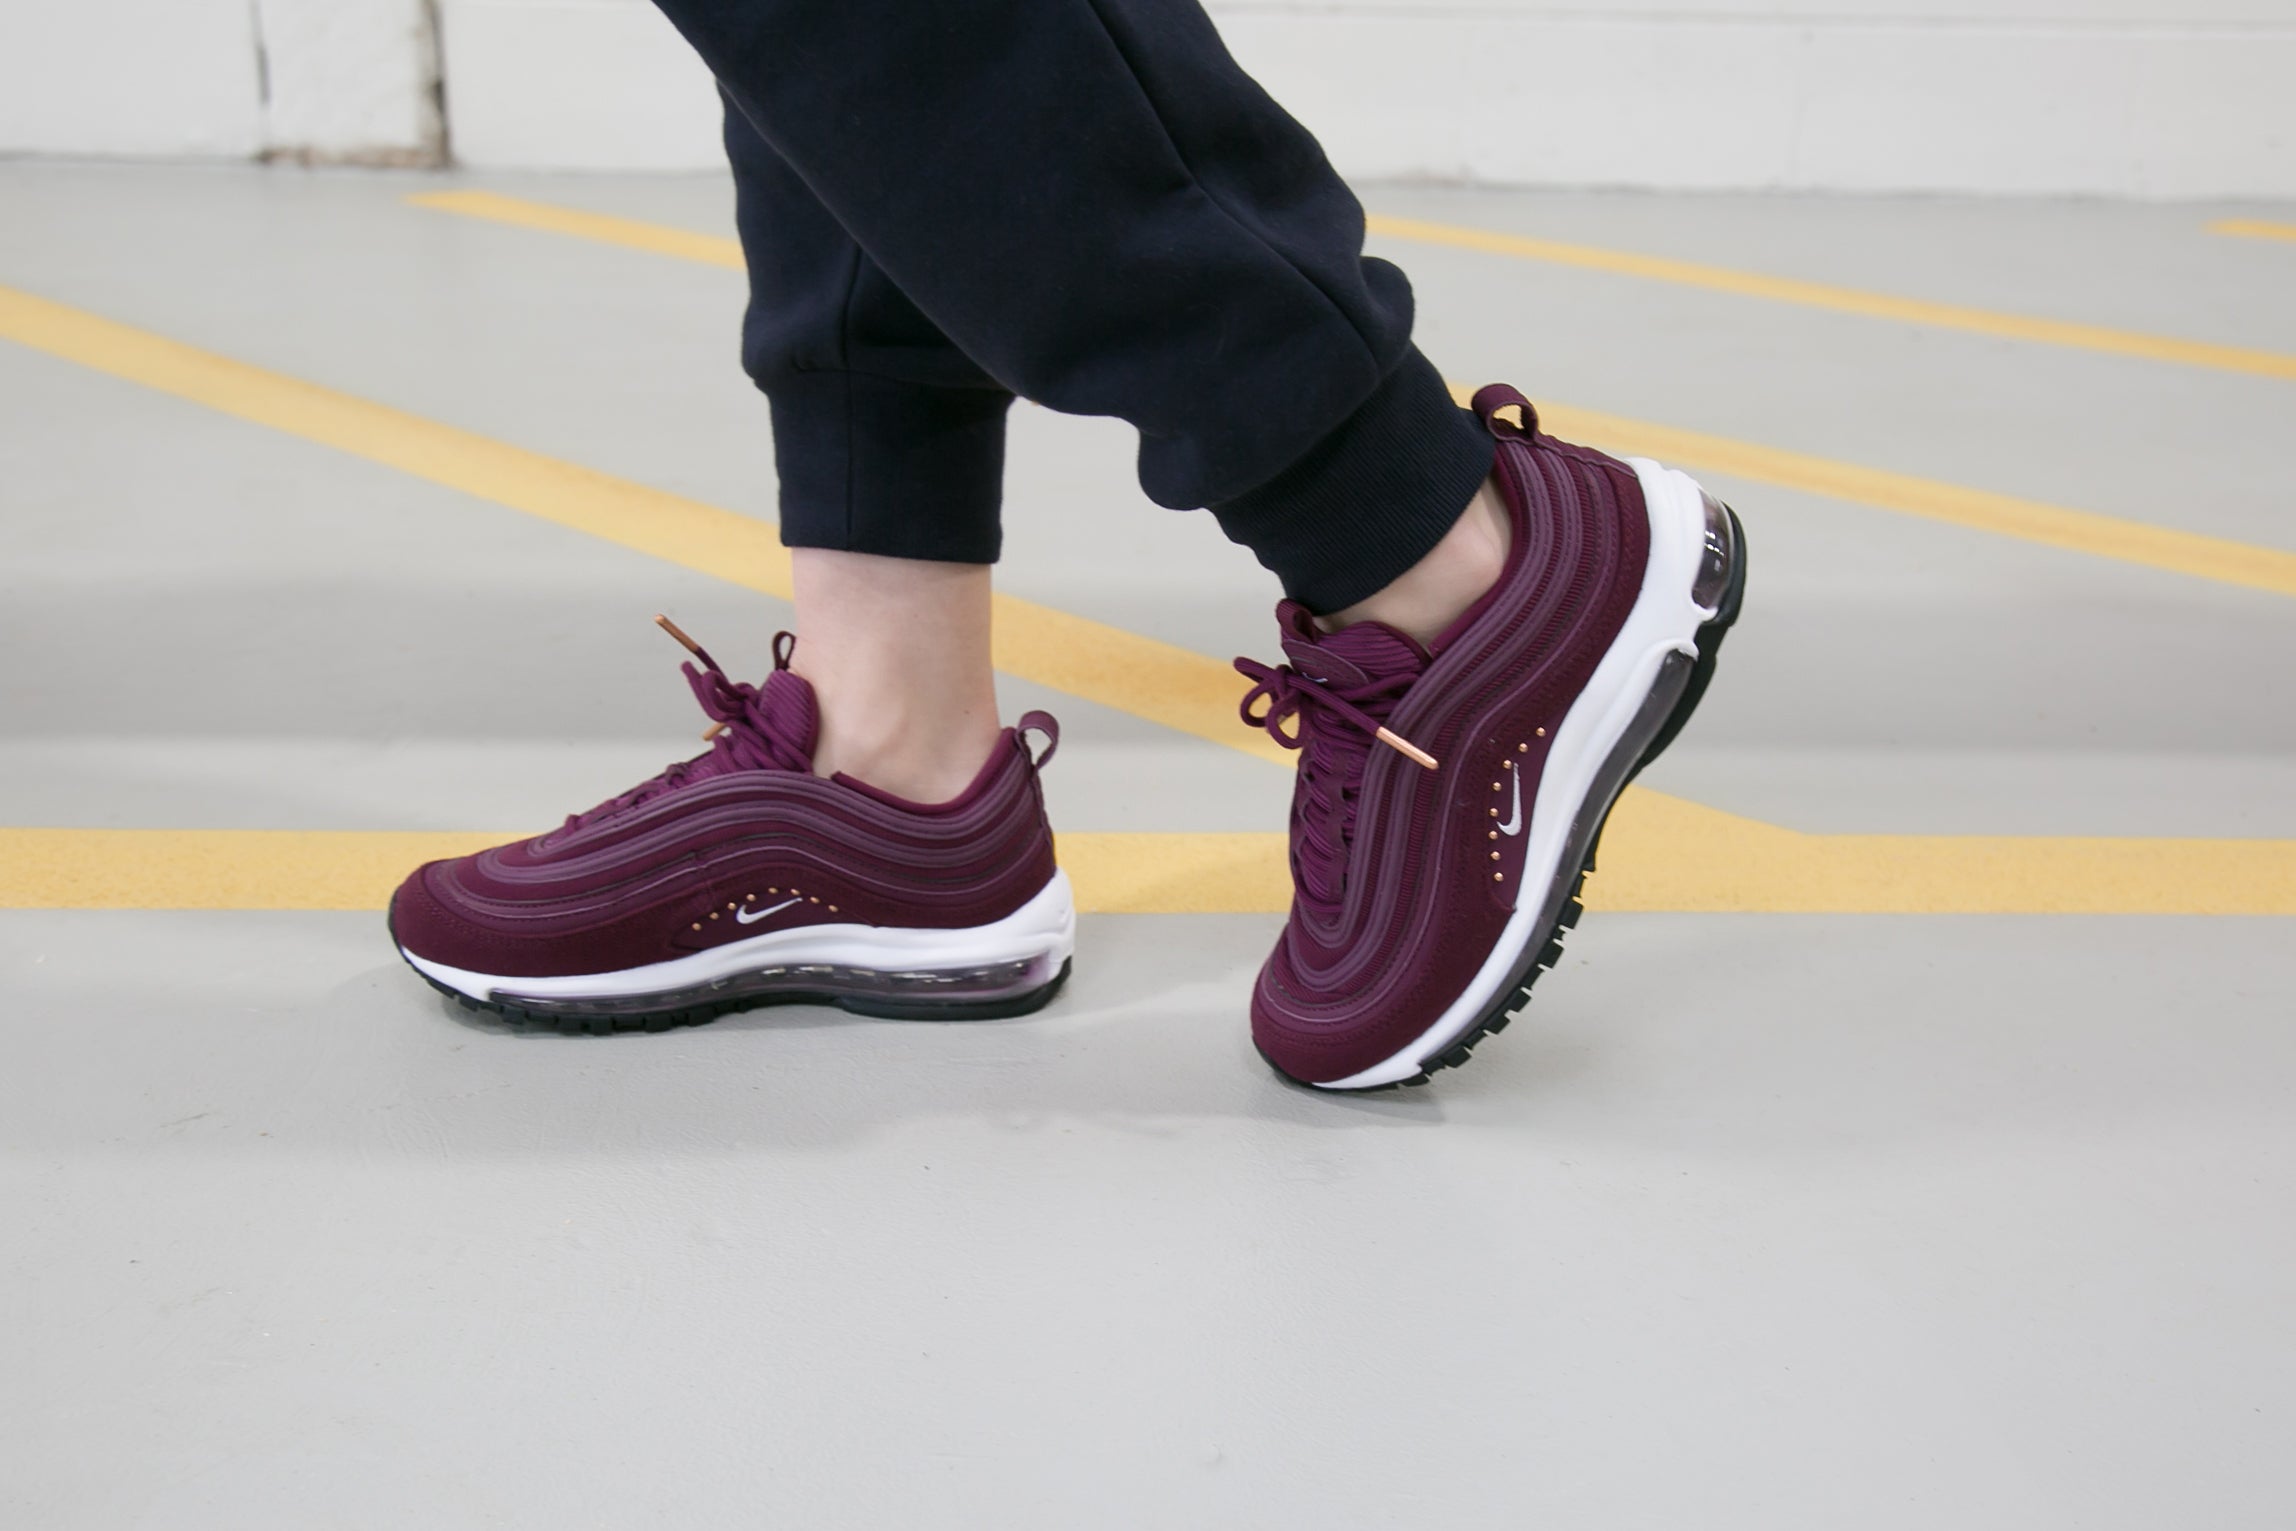 Nike Air Max 97 Edition June 21st | SNEAKER RELEASES – Finesse